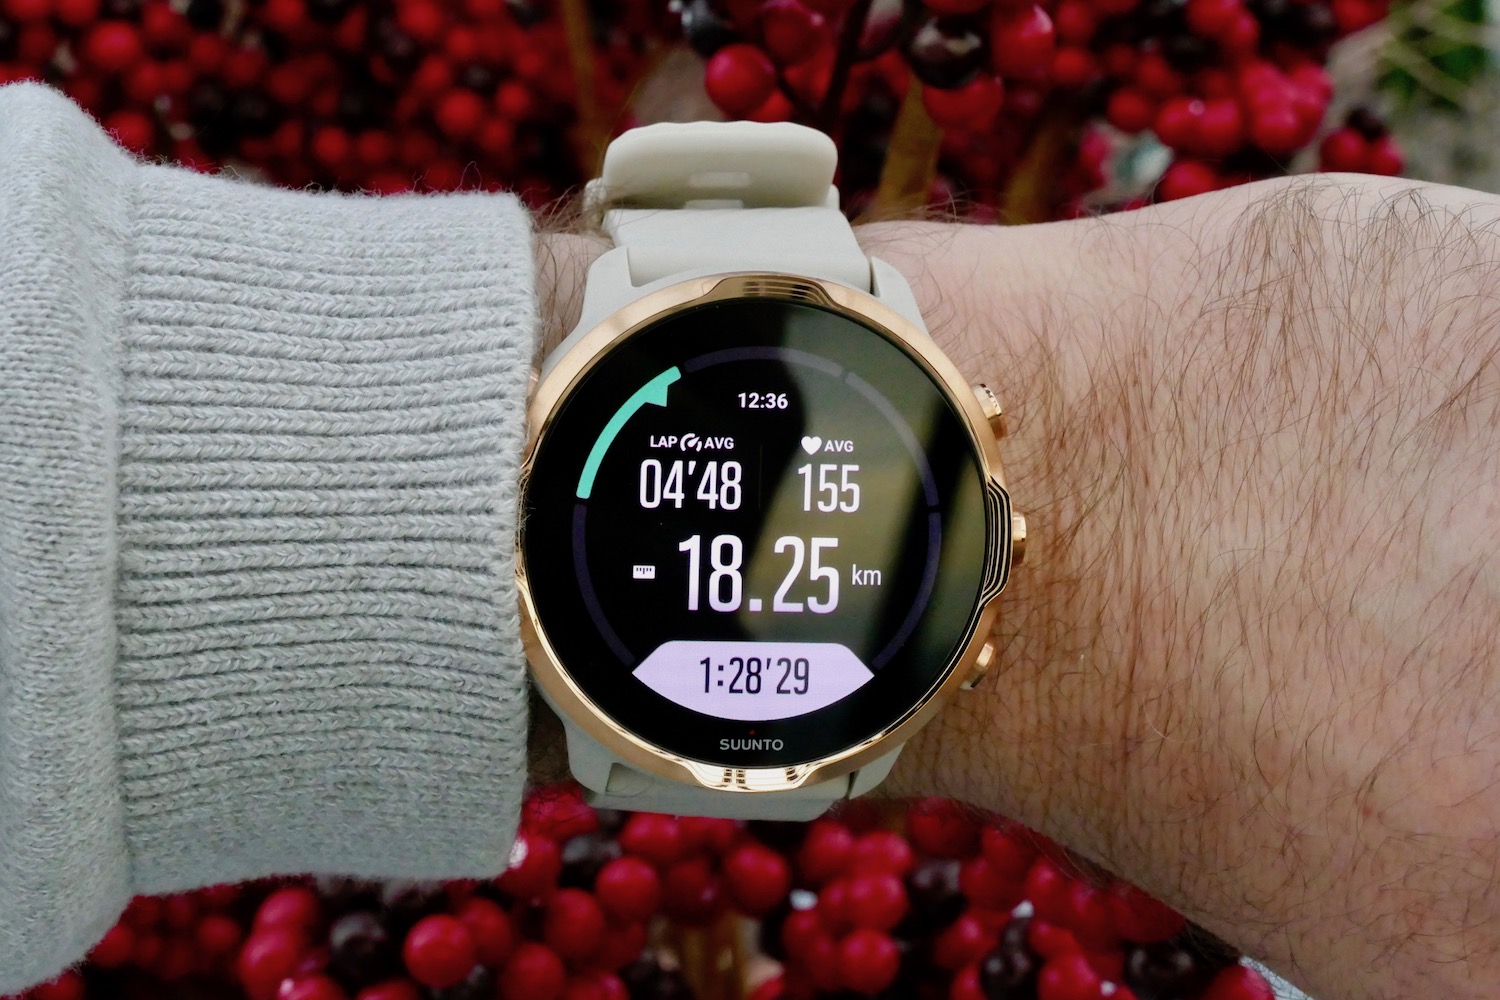 Hardcore Suunto 7 Takes on the Apple Watch in its Toughest Race